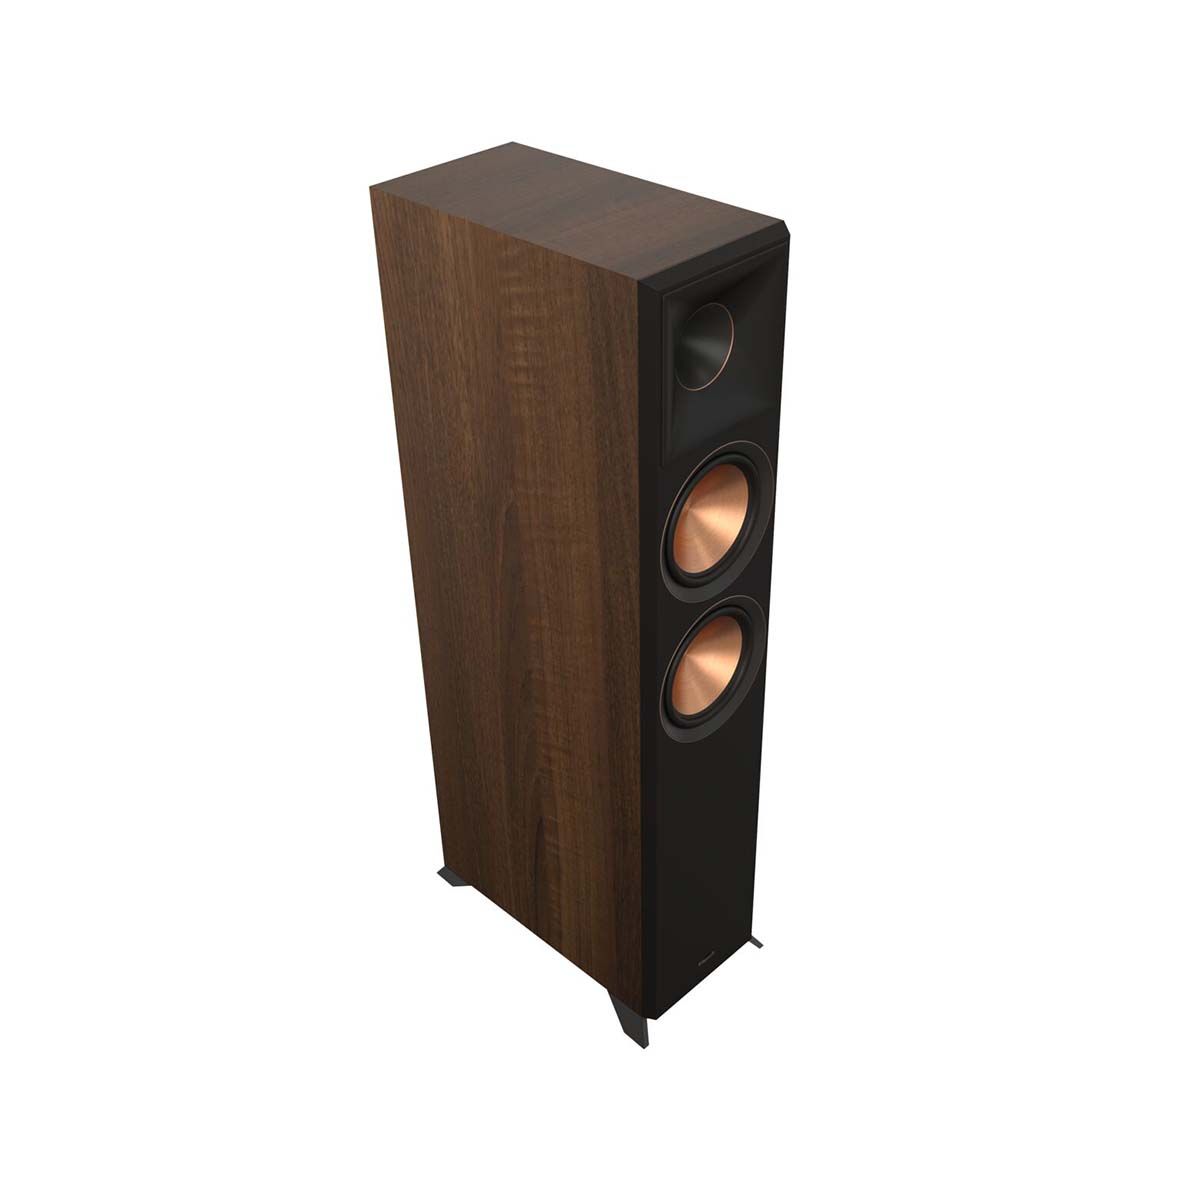 Klipsch RP-6000F II Floorstanding Speaker - Walnut - angled front view without grill